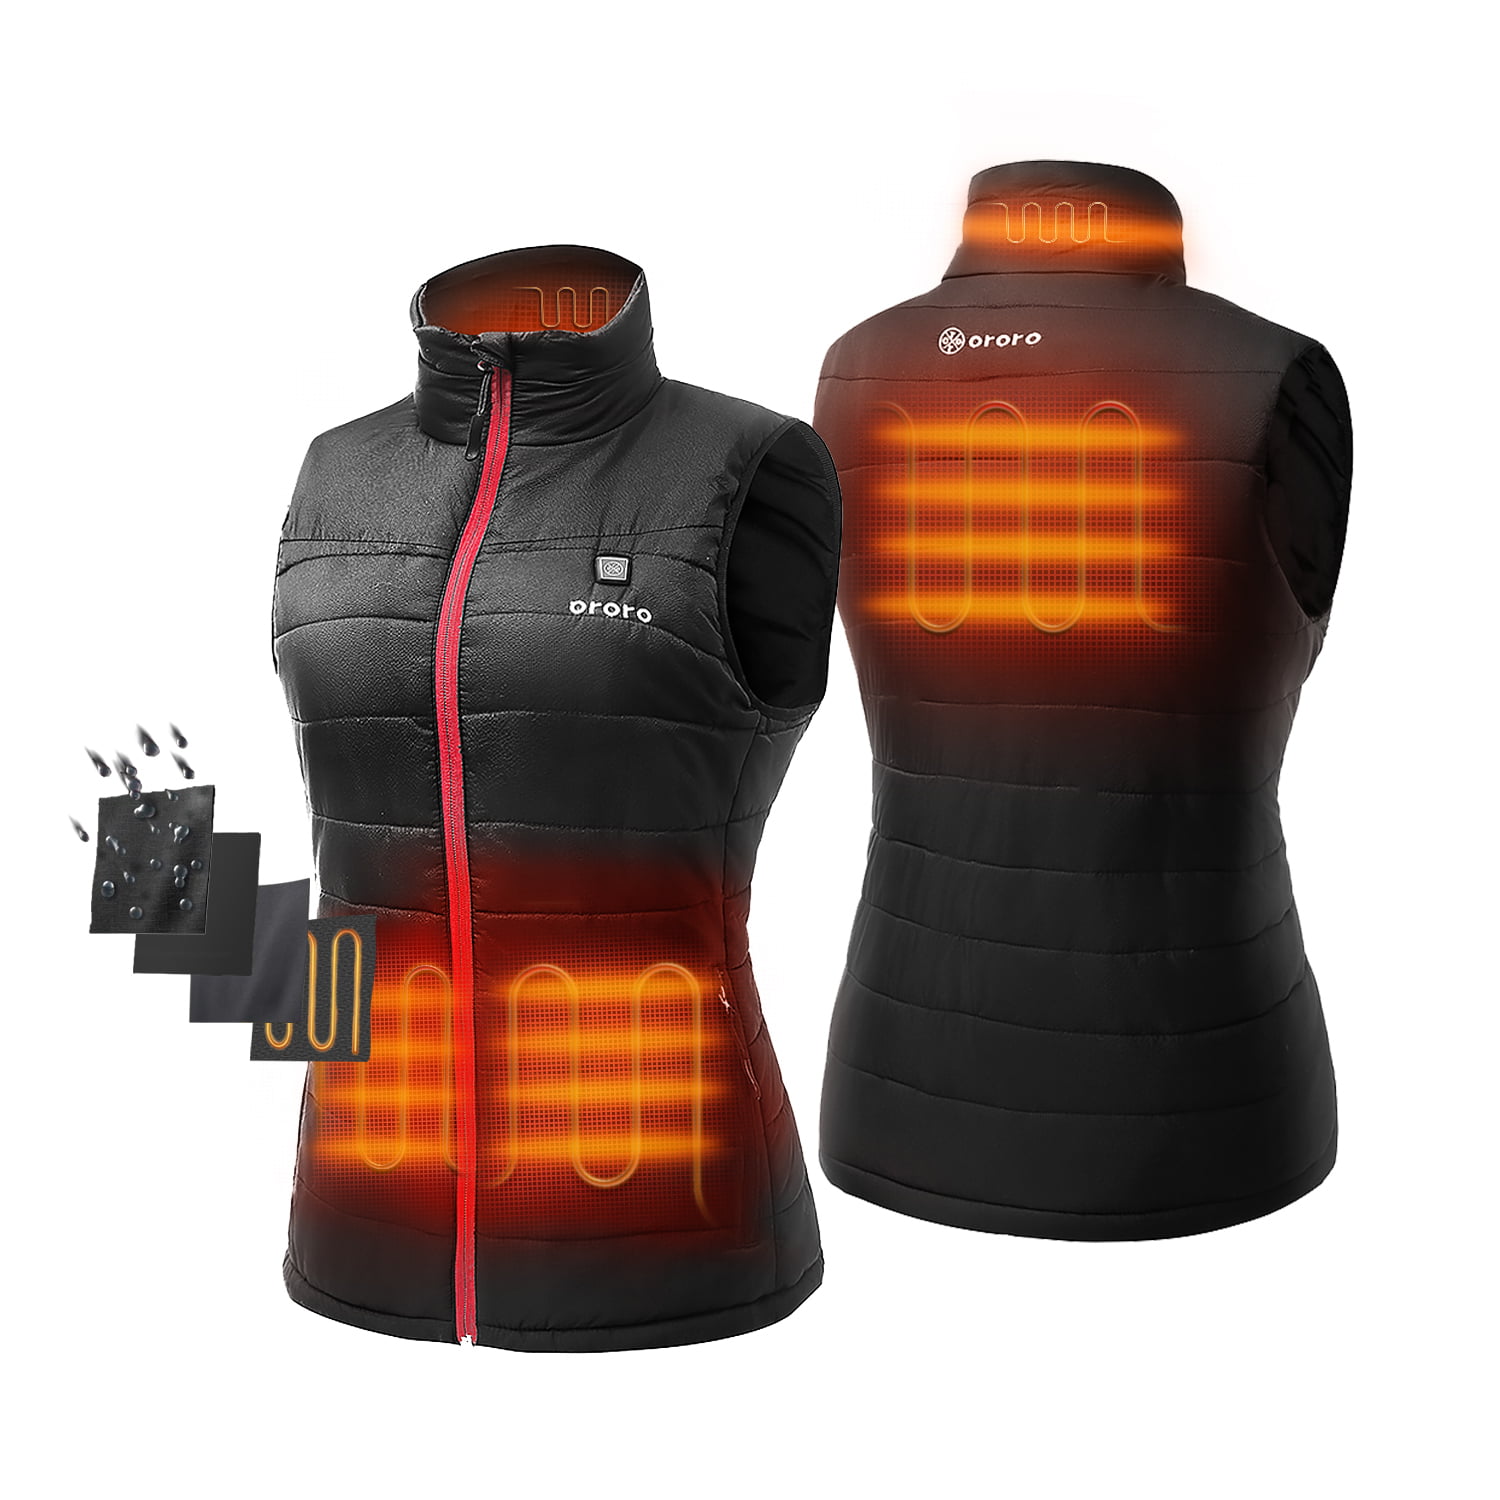 ORORO Women's Lightweight Heated Vest with Battery Pack (Black,S)